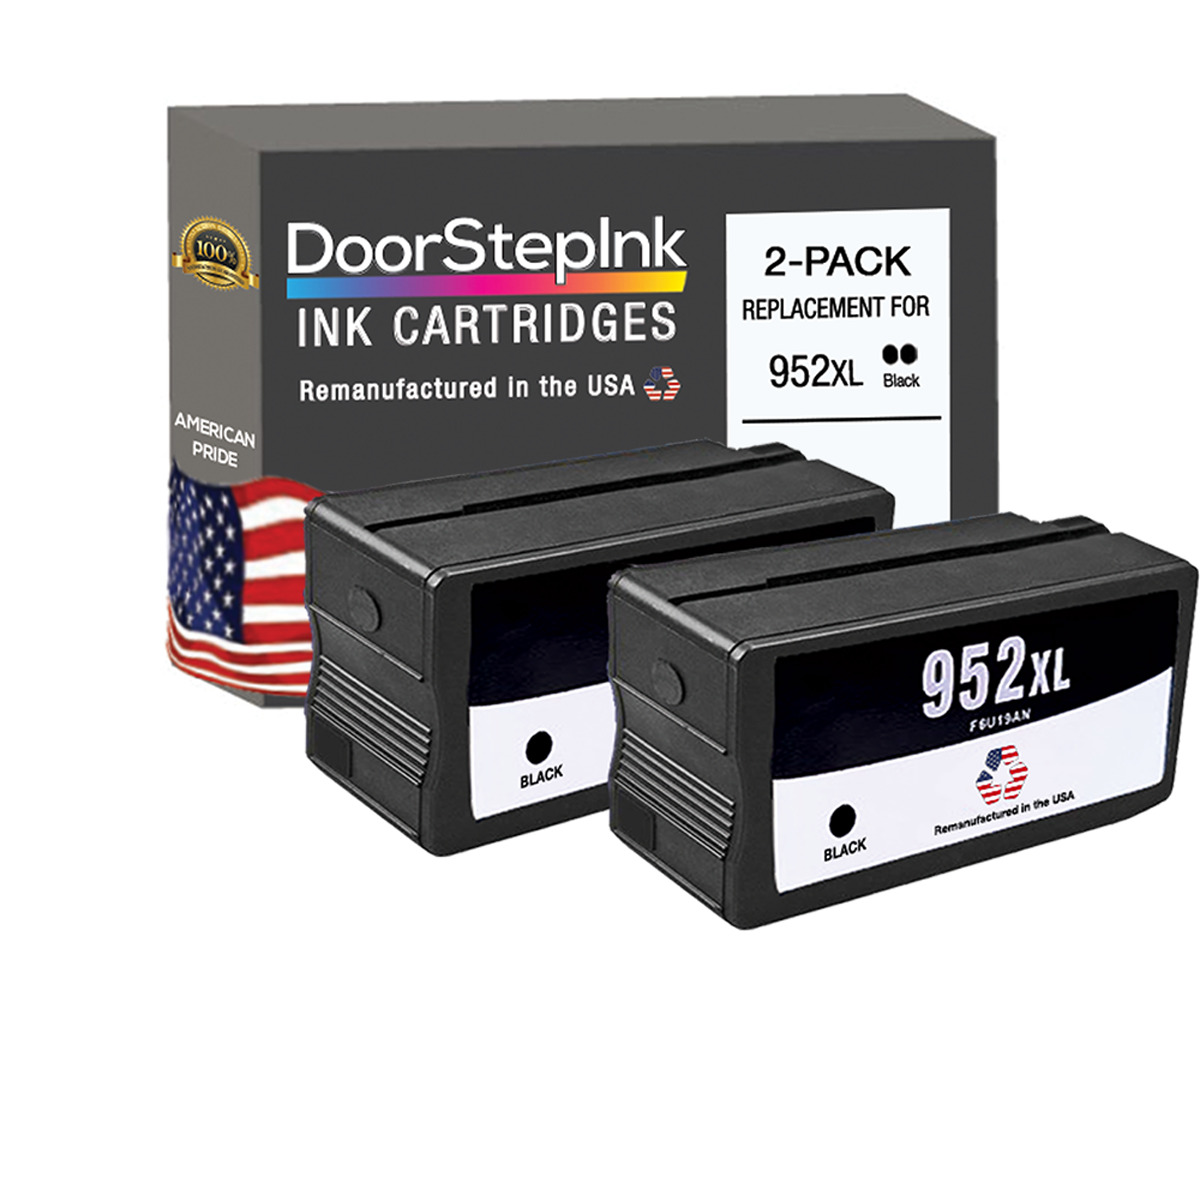 DoorStepInk Remanufactured in the USA Ink Cartridge for HP 952XL Black 2 PK